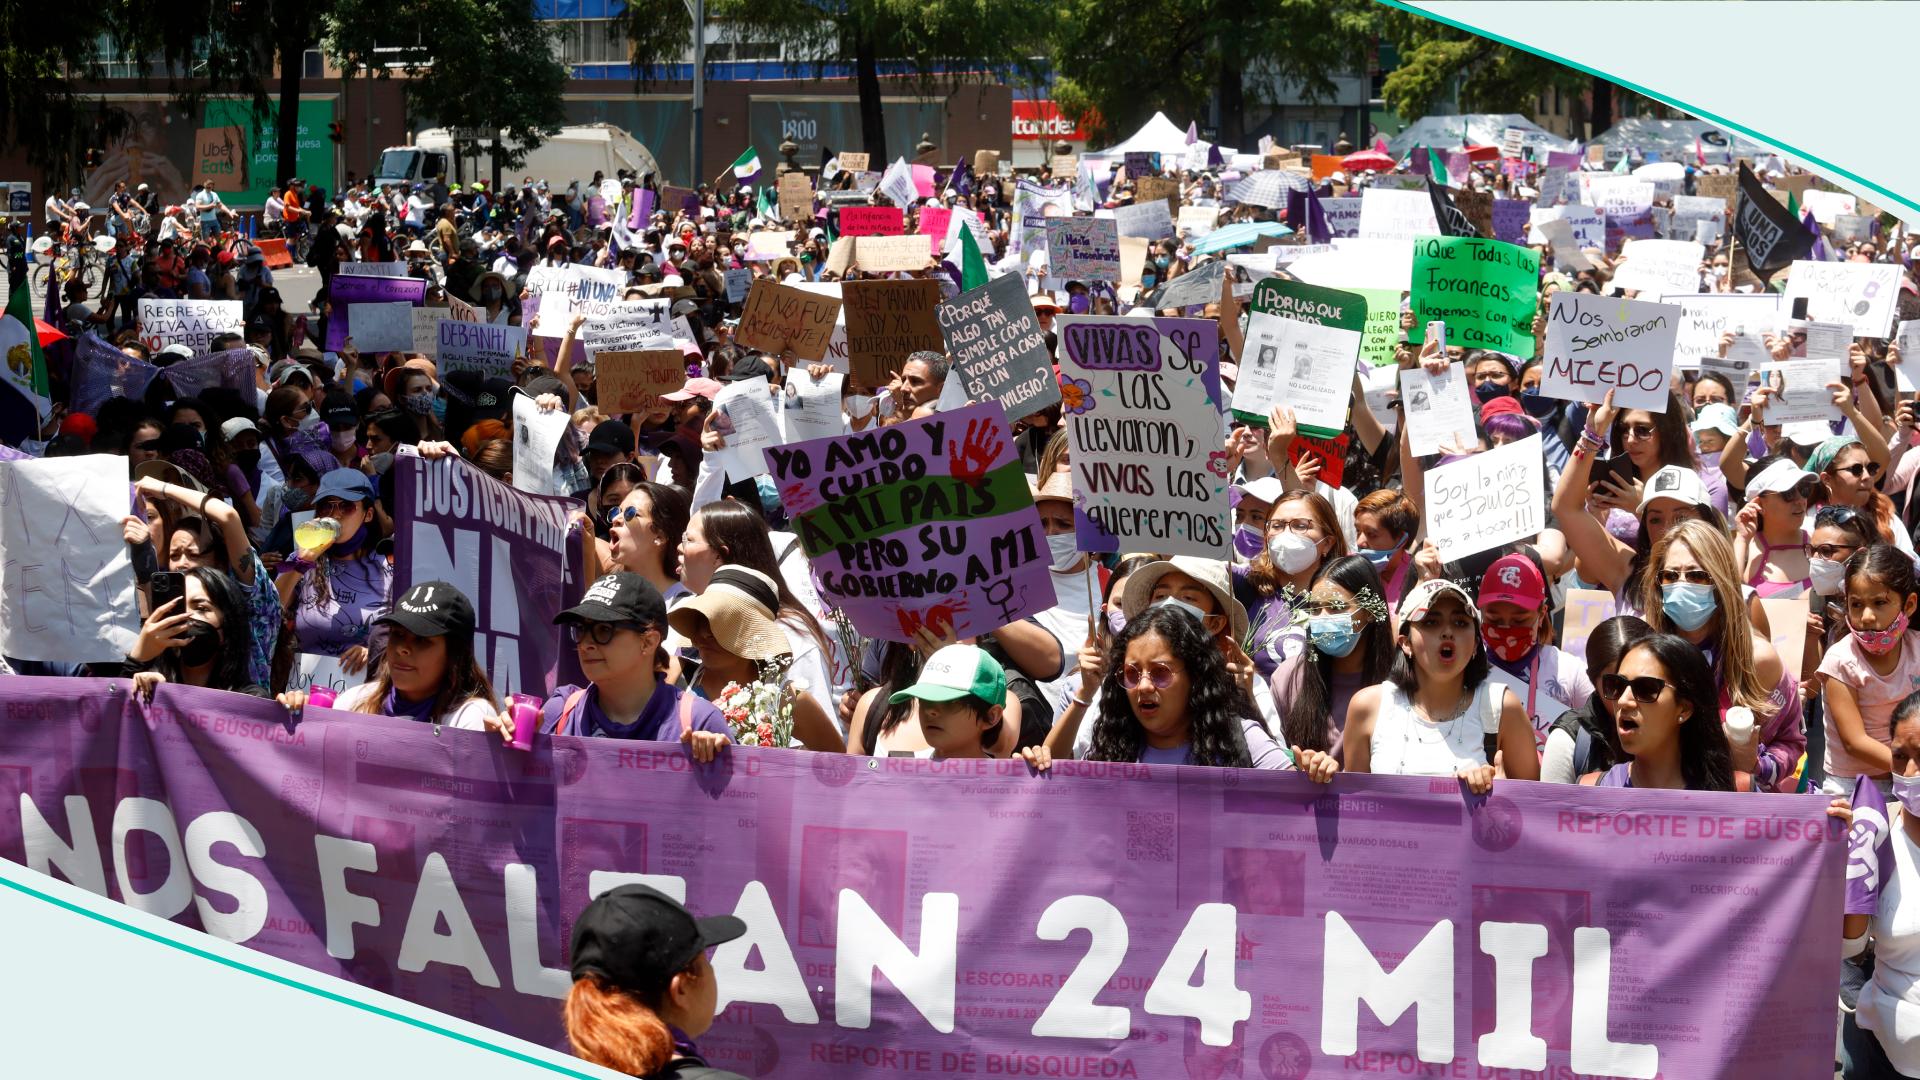 A protest in Mexico City against gender violence after Debanhi Escobar's death